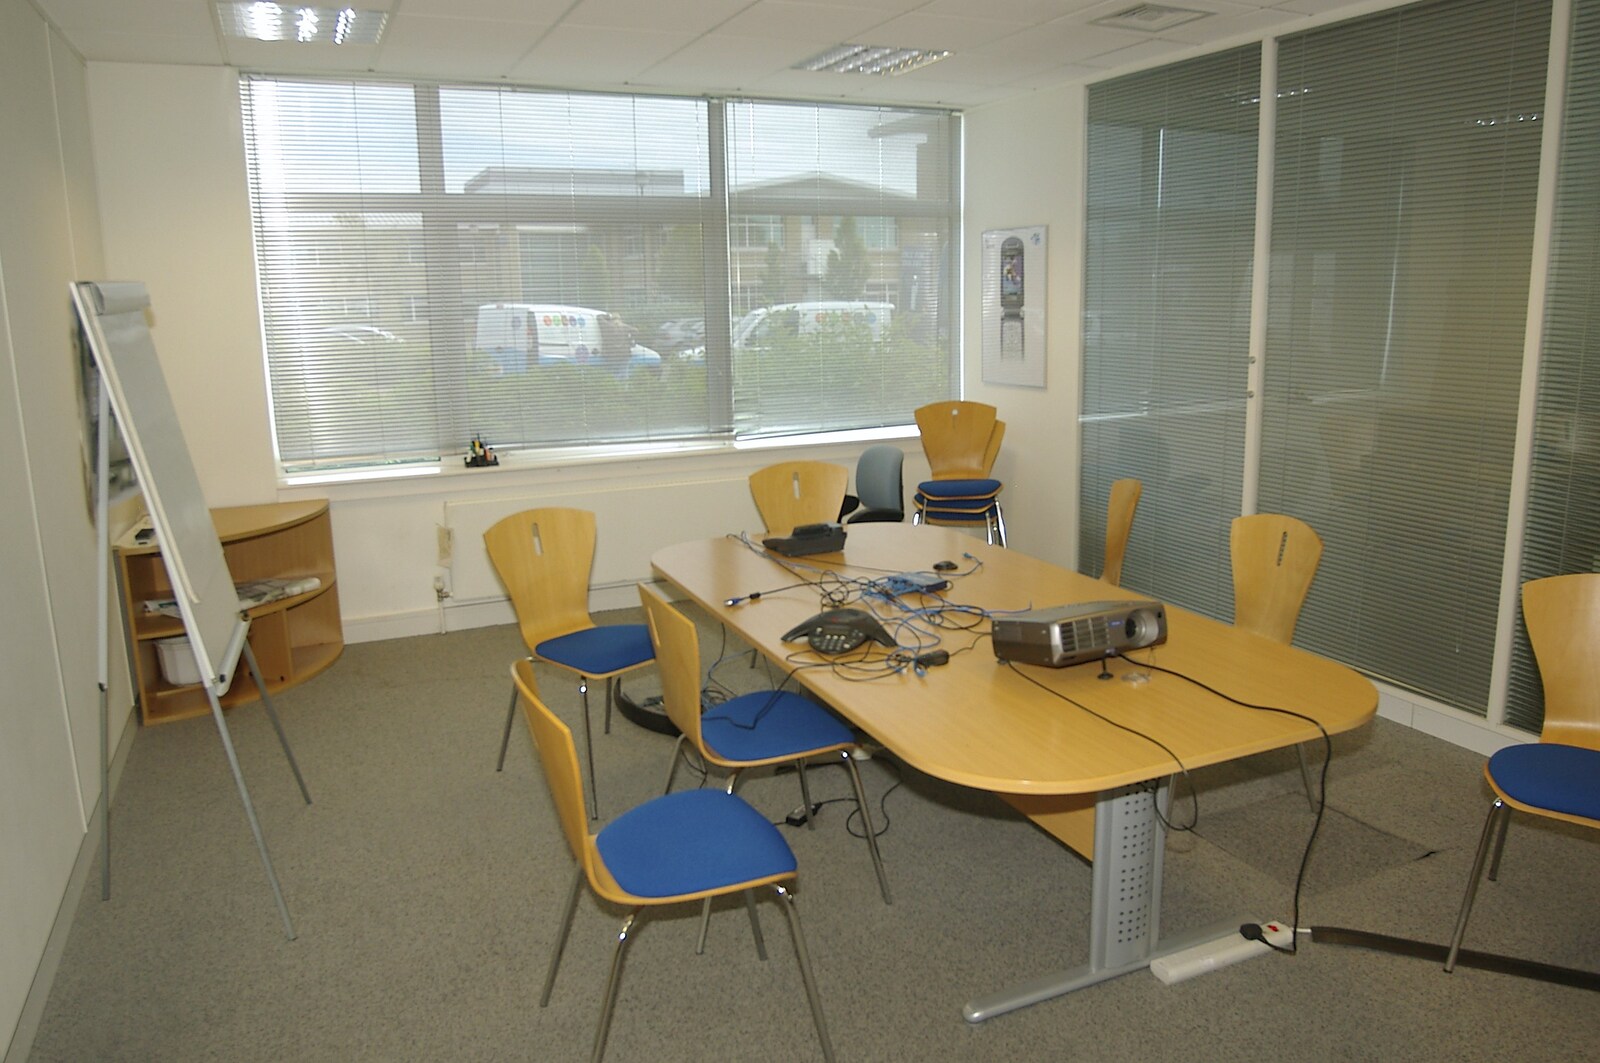 One of the conference rooms from Qualcomm Moves Offices, Milton Road, Cambridge - 26th July 2006